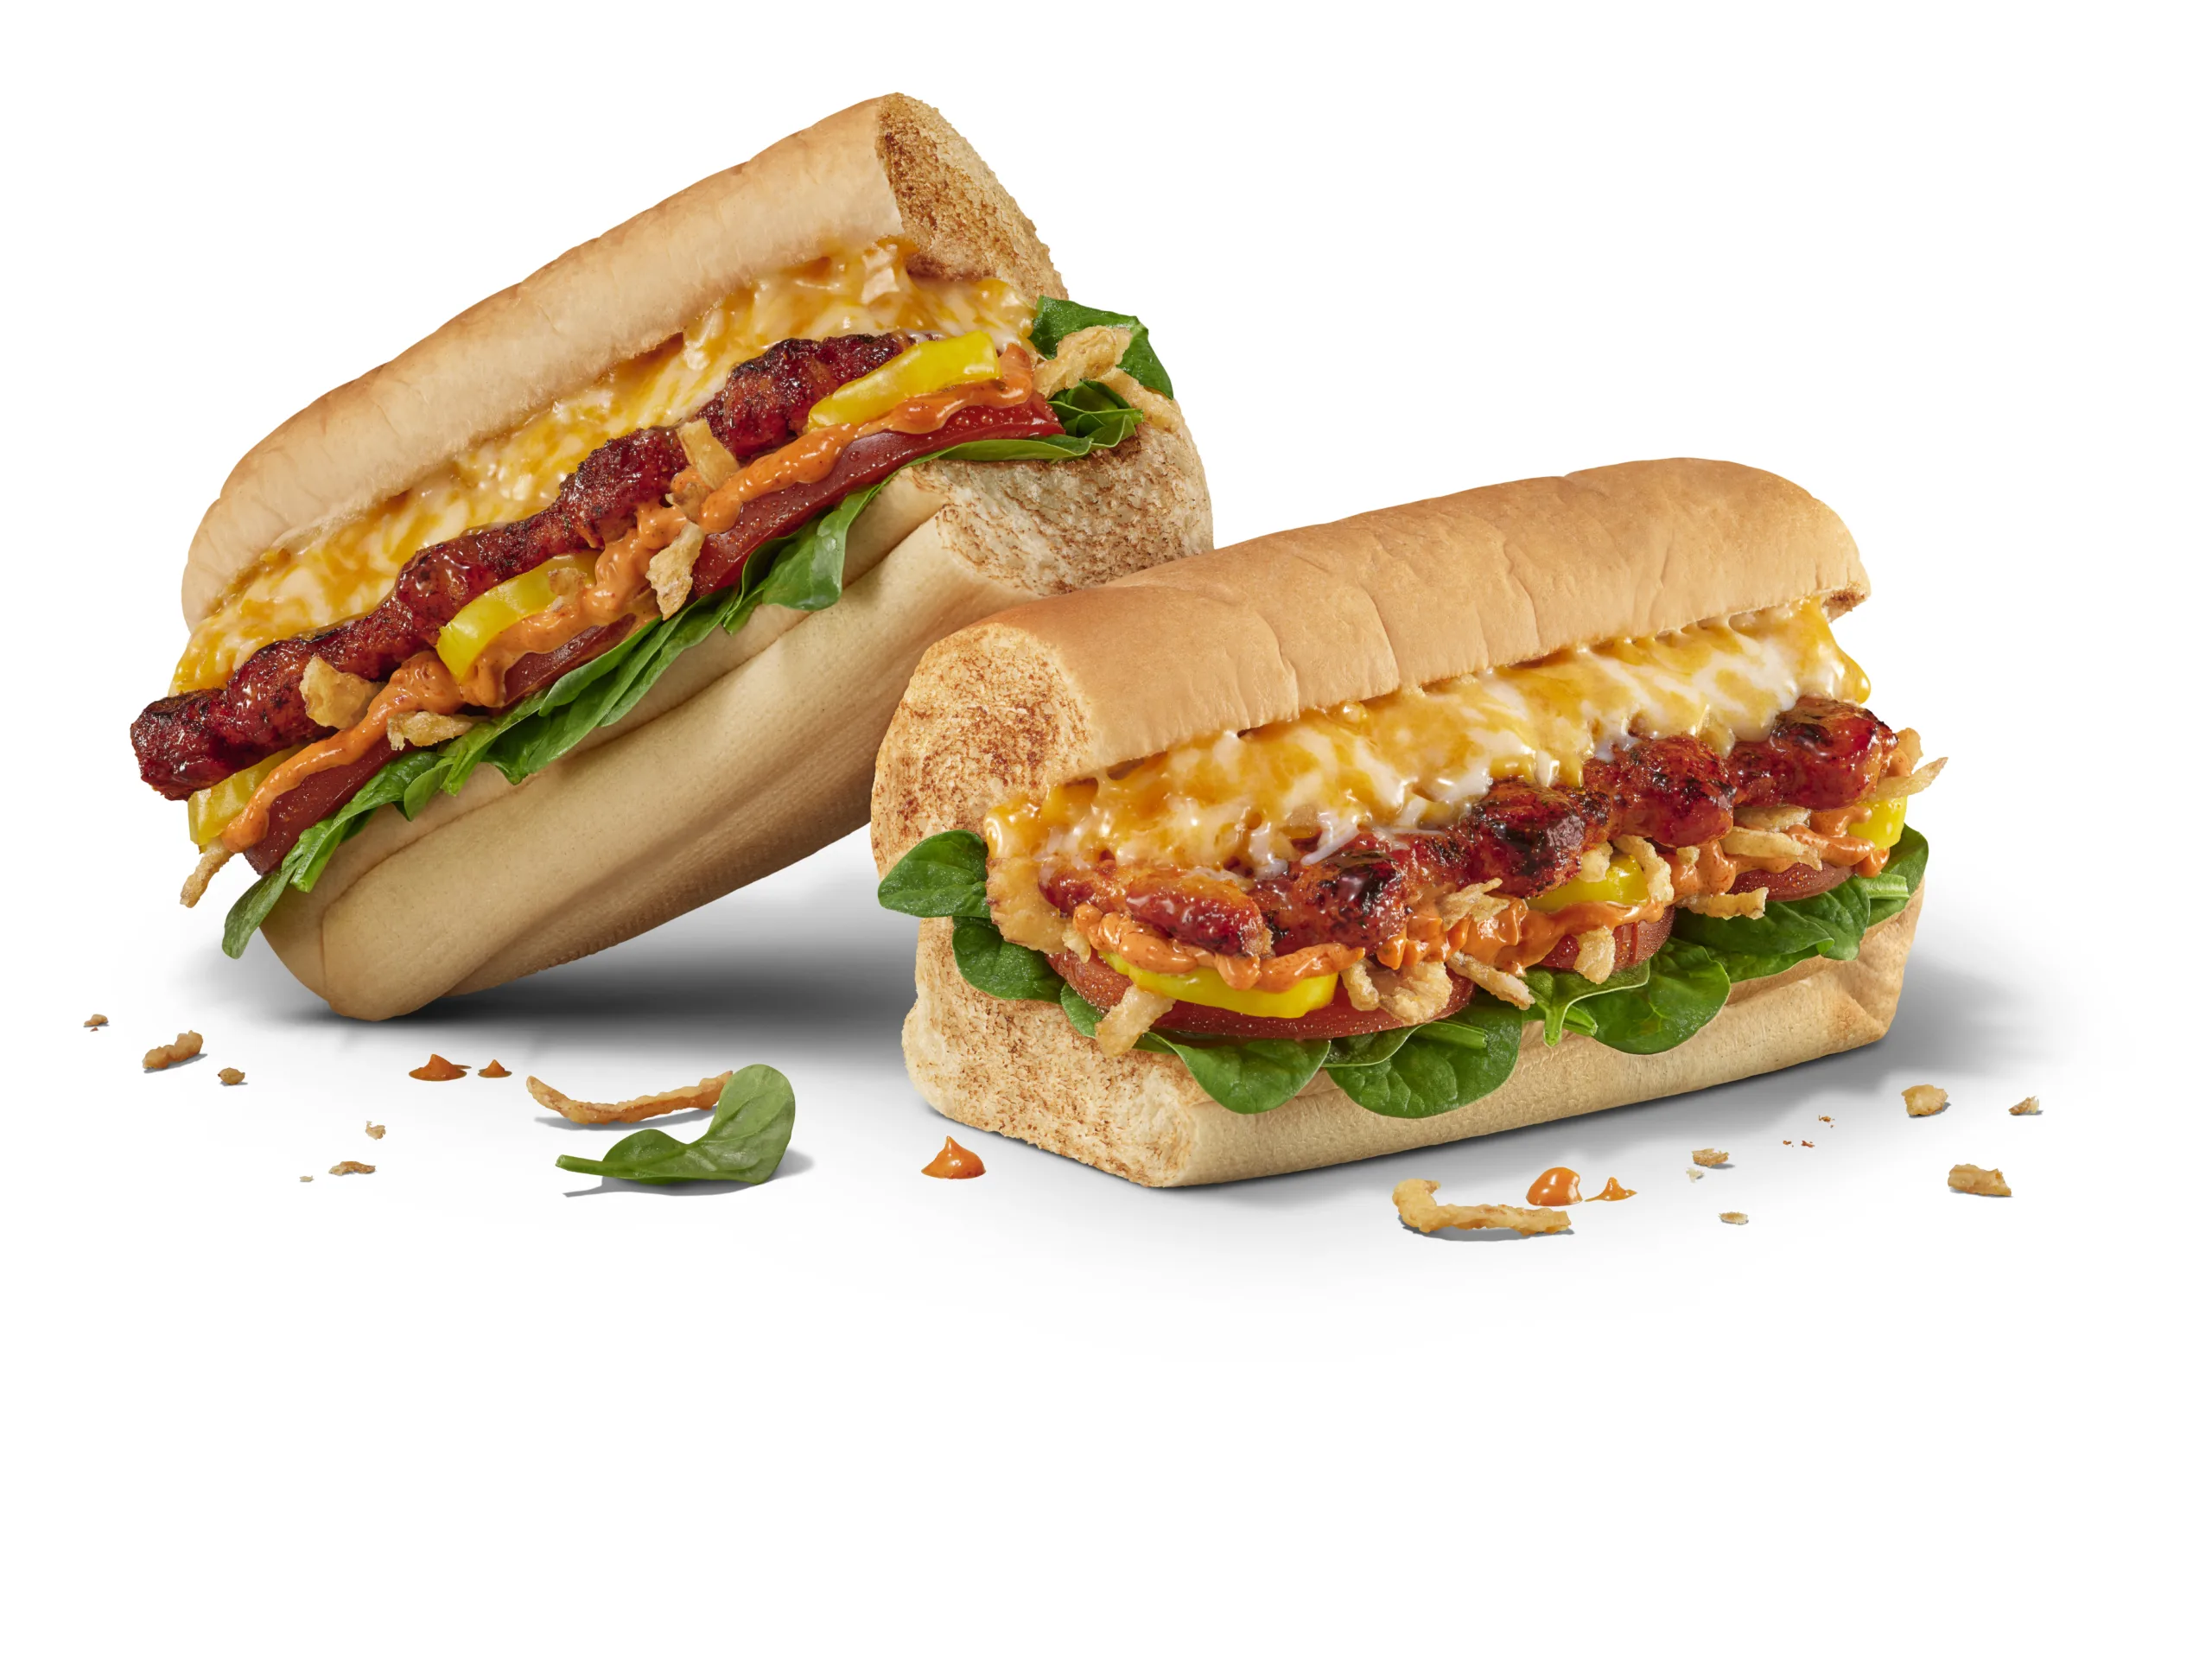 Subway Canada is Launching an All-New Globally Inspired Menu, Taking the Nation on a Taste Adventure as Part of the Subway Series